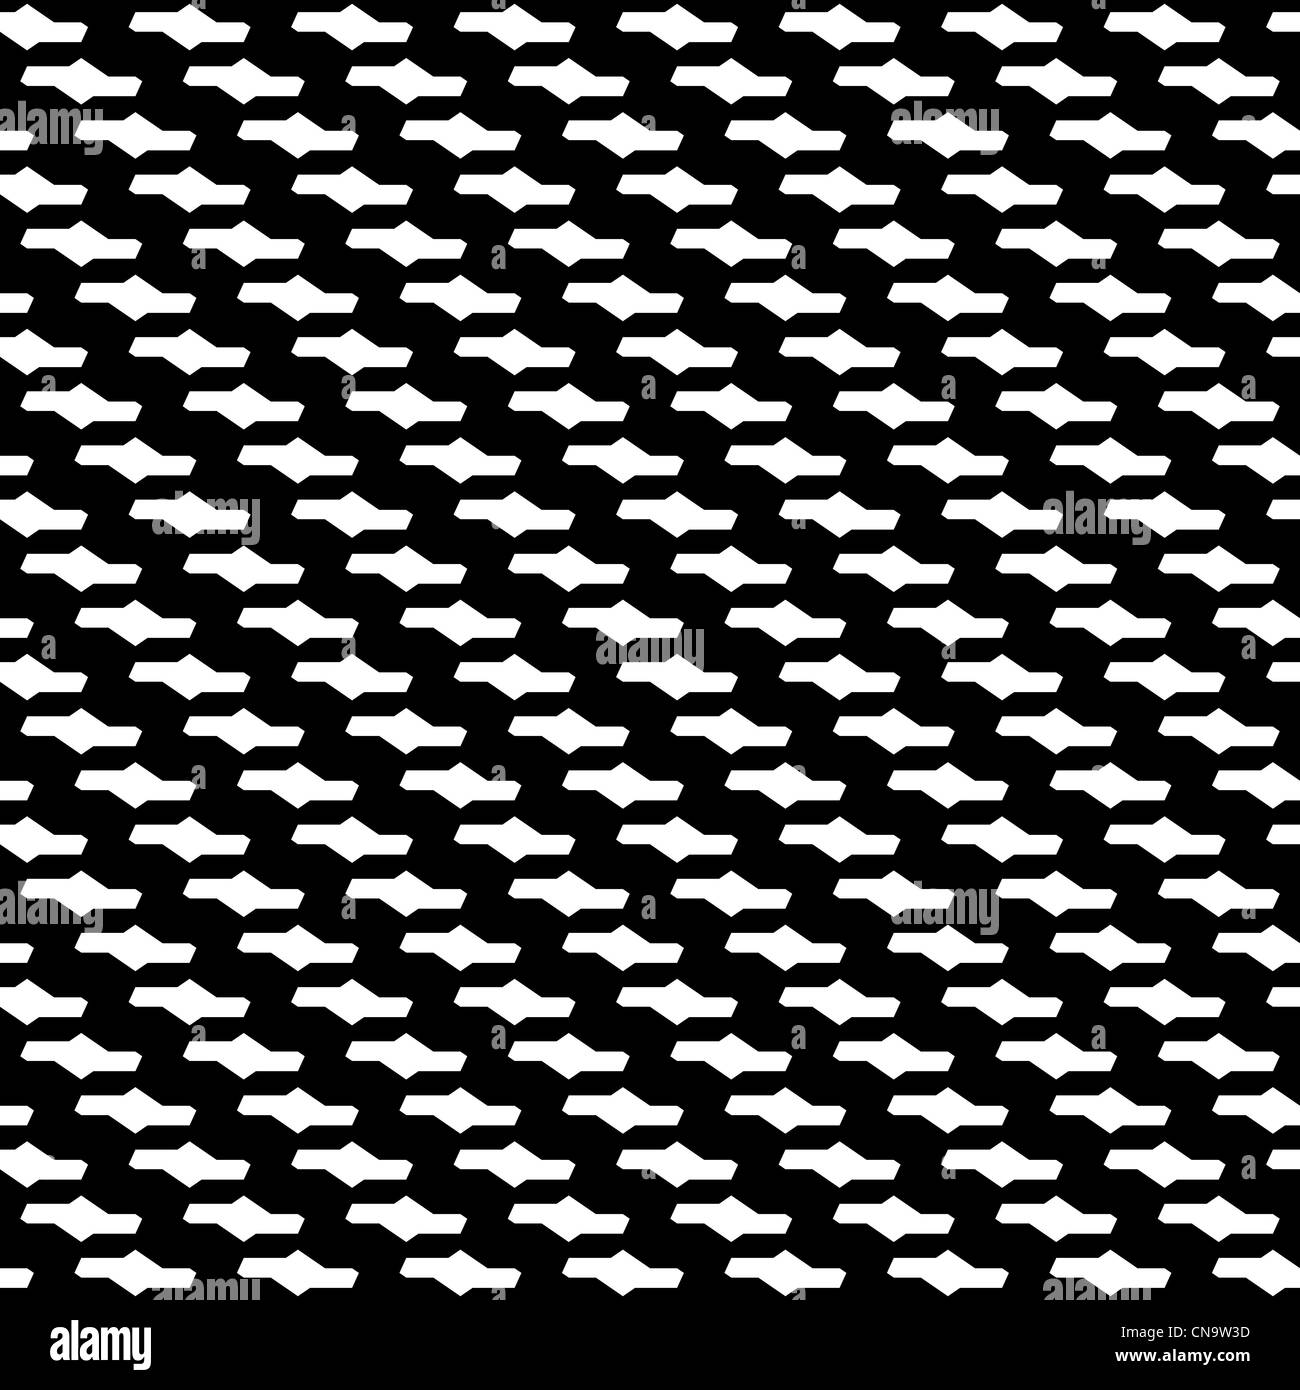 Trendy houndstooth pattern that tiles seamlessly as a pattern. Stock Photo